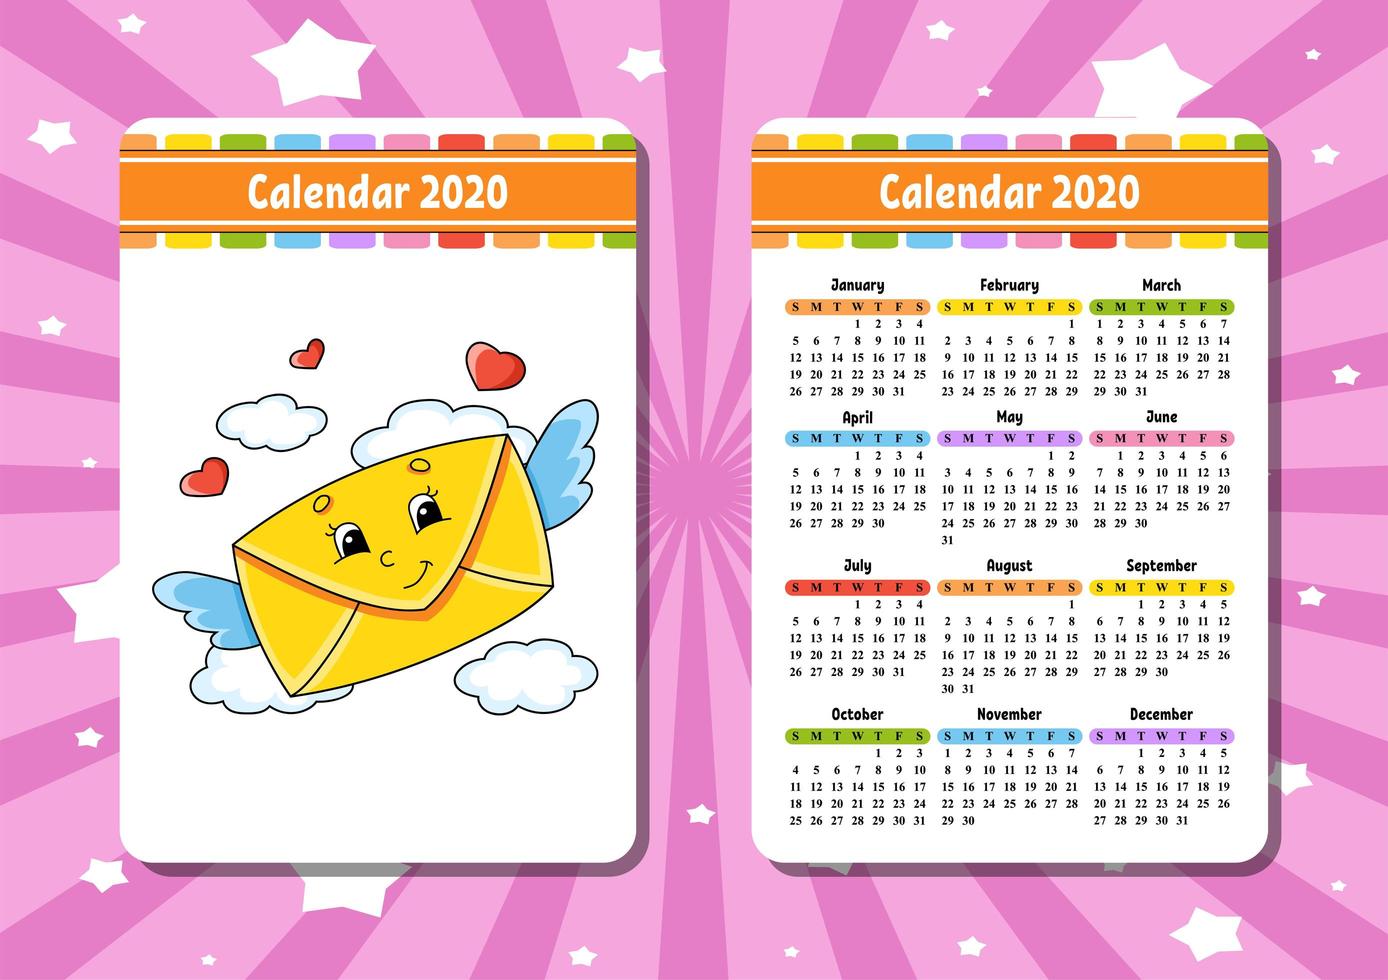 Calendar for 2020 with a cute character. Pocket size. Fun and bright design. Isolated vector illustration. Cartoon style.